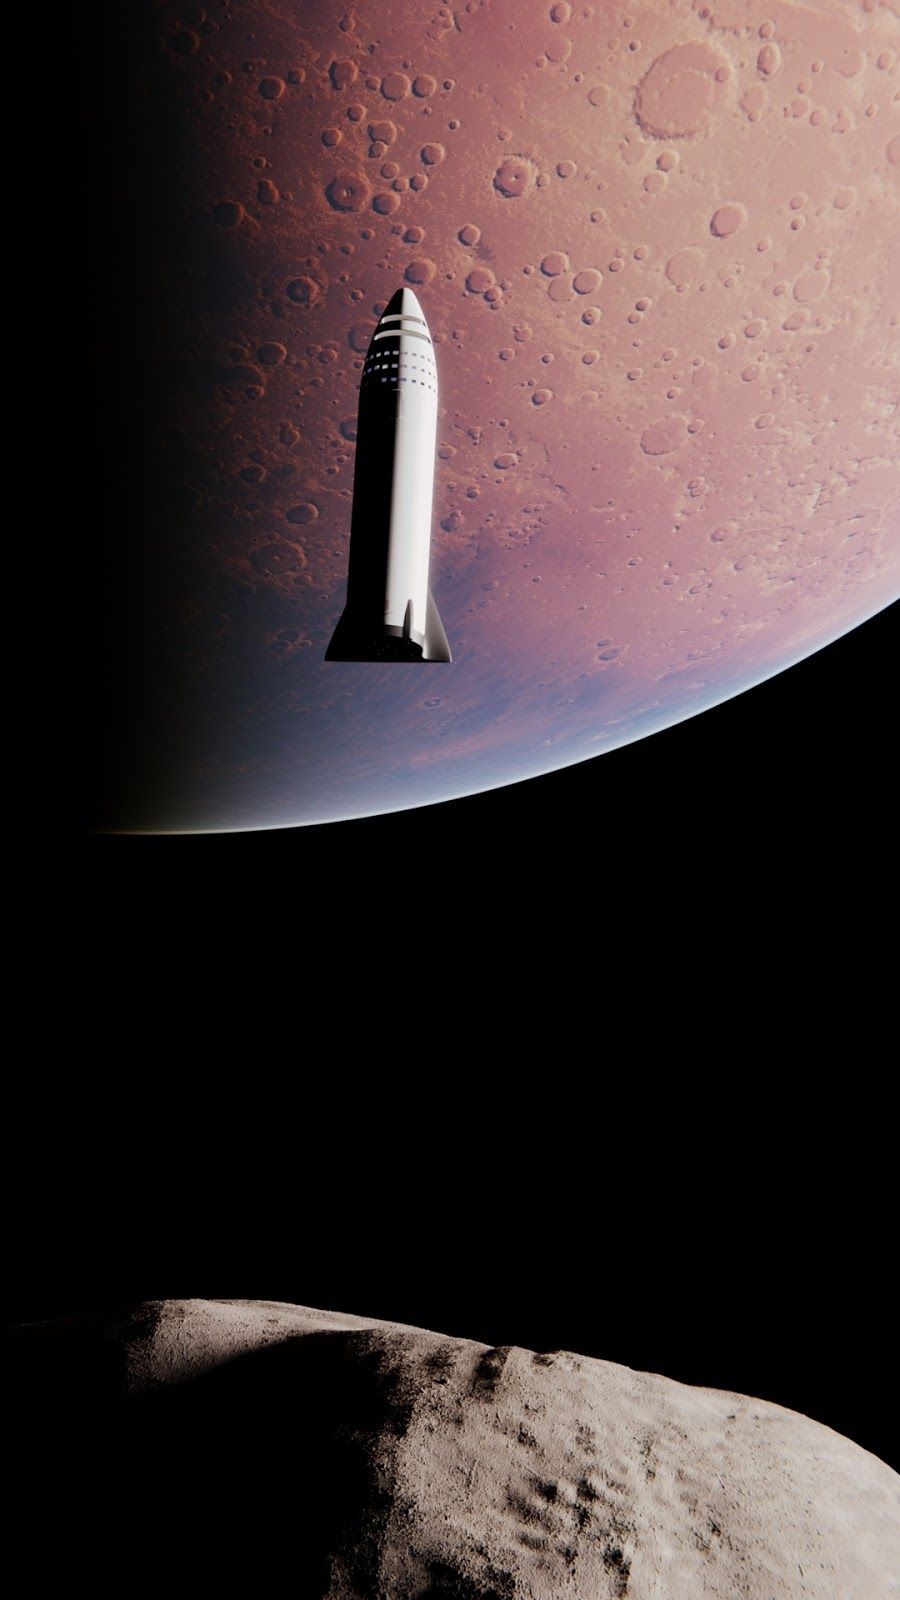 SpaceX BFR spaceship approaching Phobos by Mack Crawford. Spacex, Spaceship concept, Spacex starship